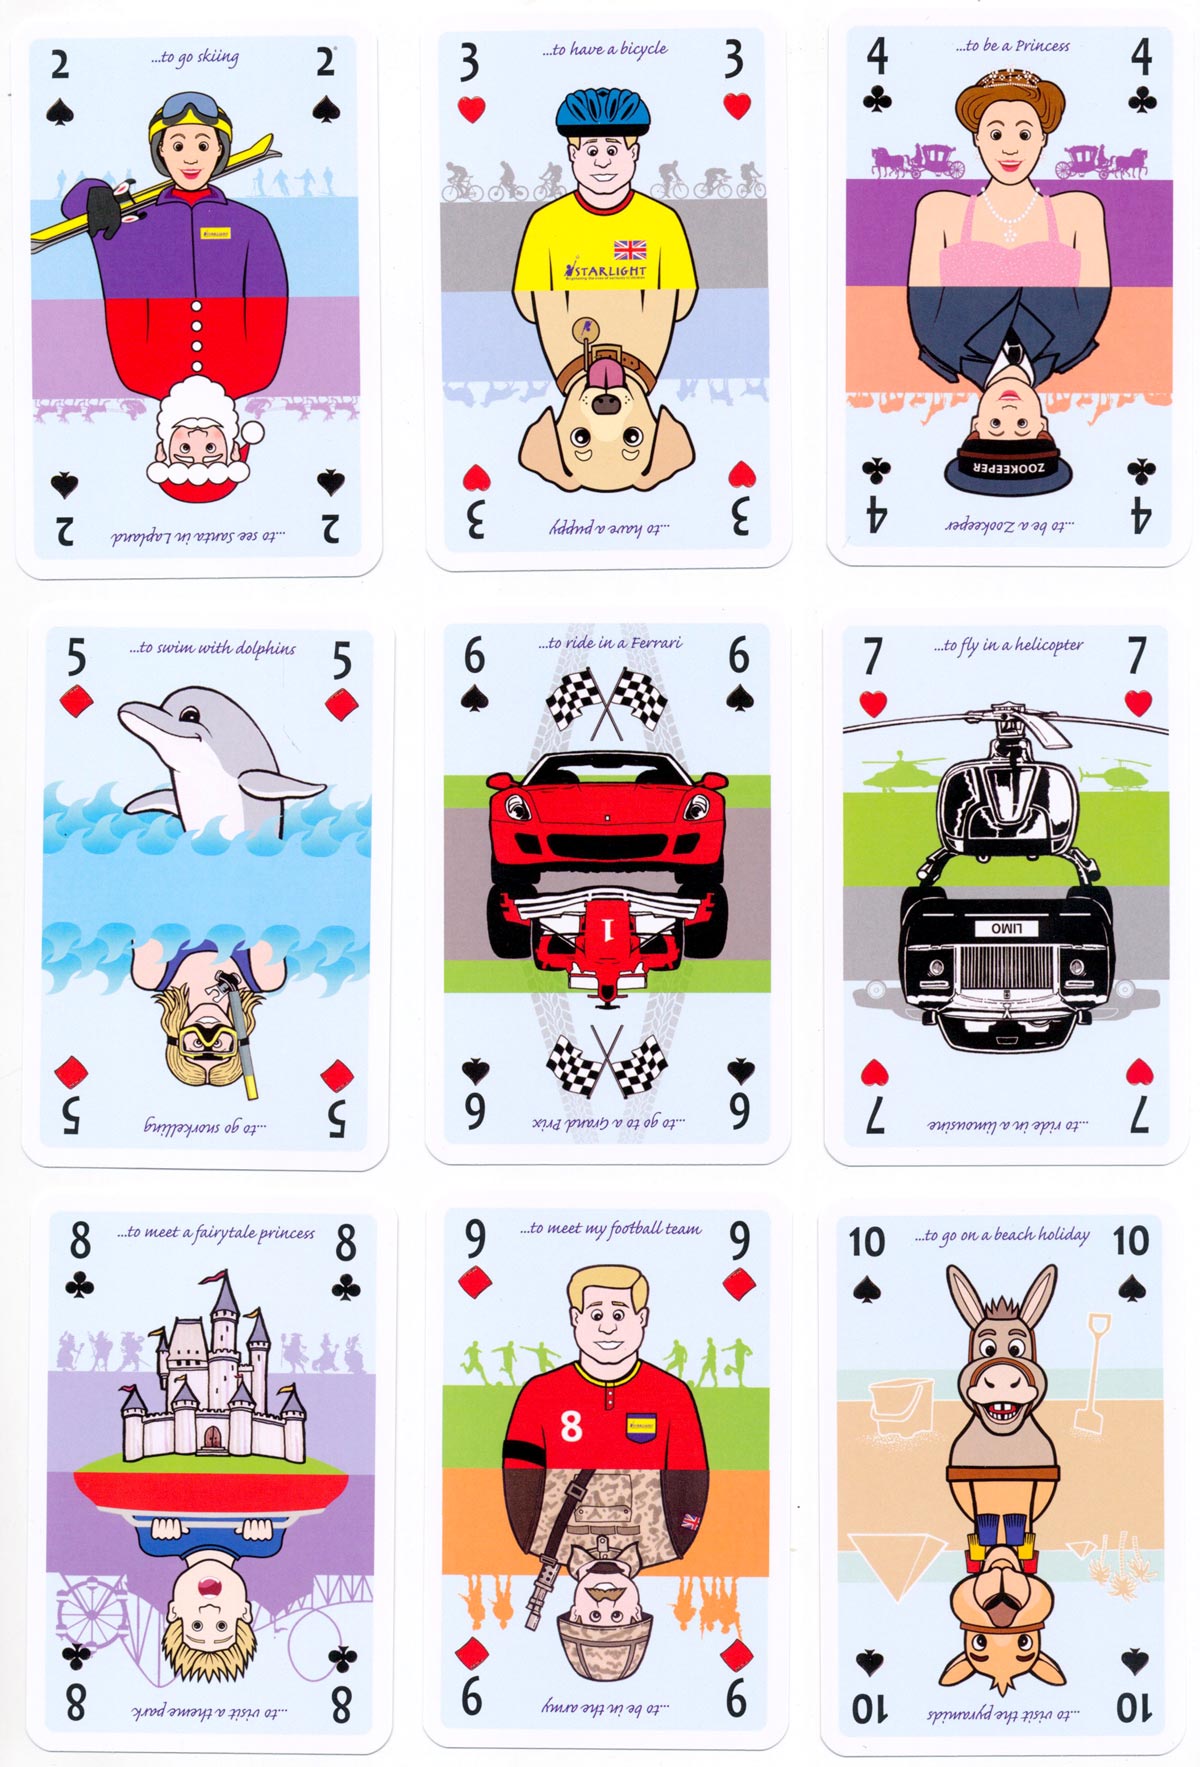 ‘Starlight’ playing cards - brightening the lives of seriously ill children - published by Simon Lucas Bridge Supplies Ltd